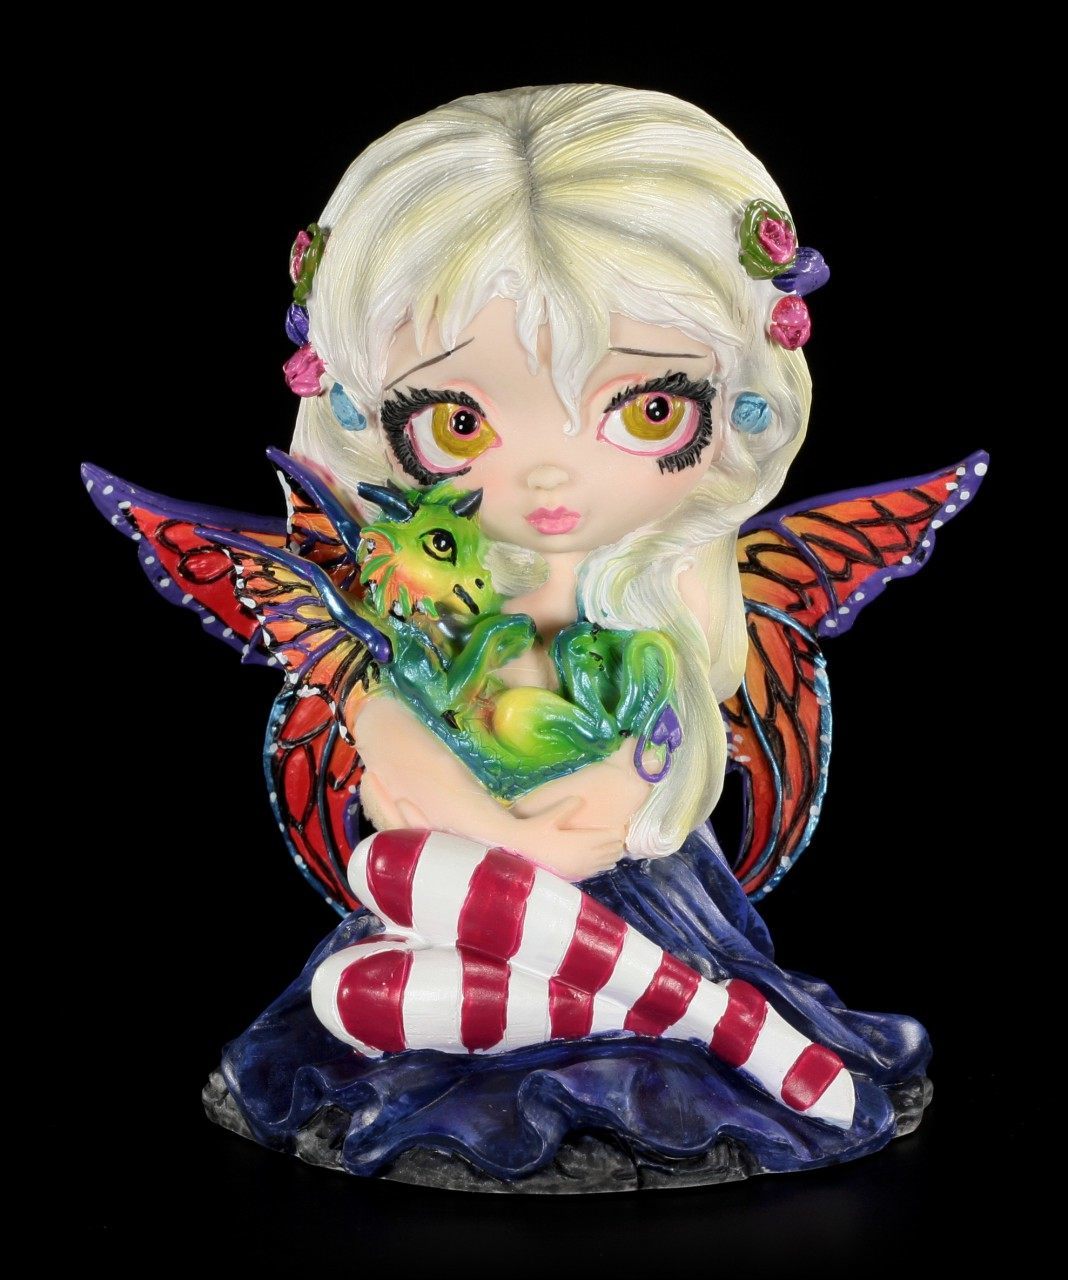 Fairy Figurine with Dragon - Darling Dragonling - limited